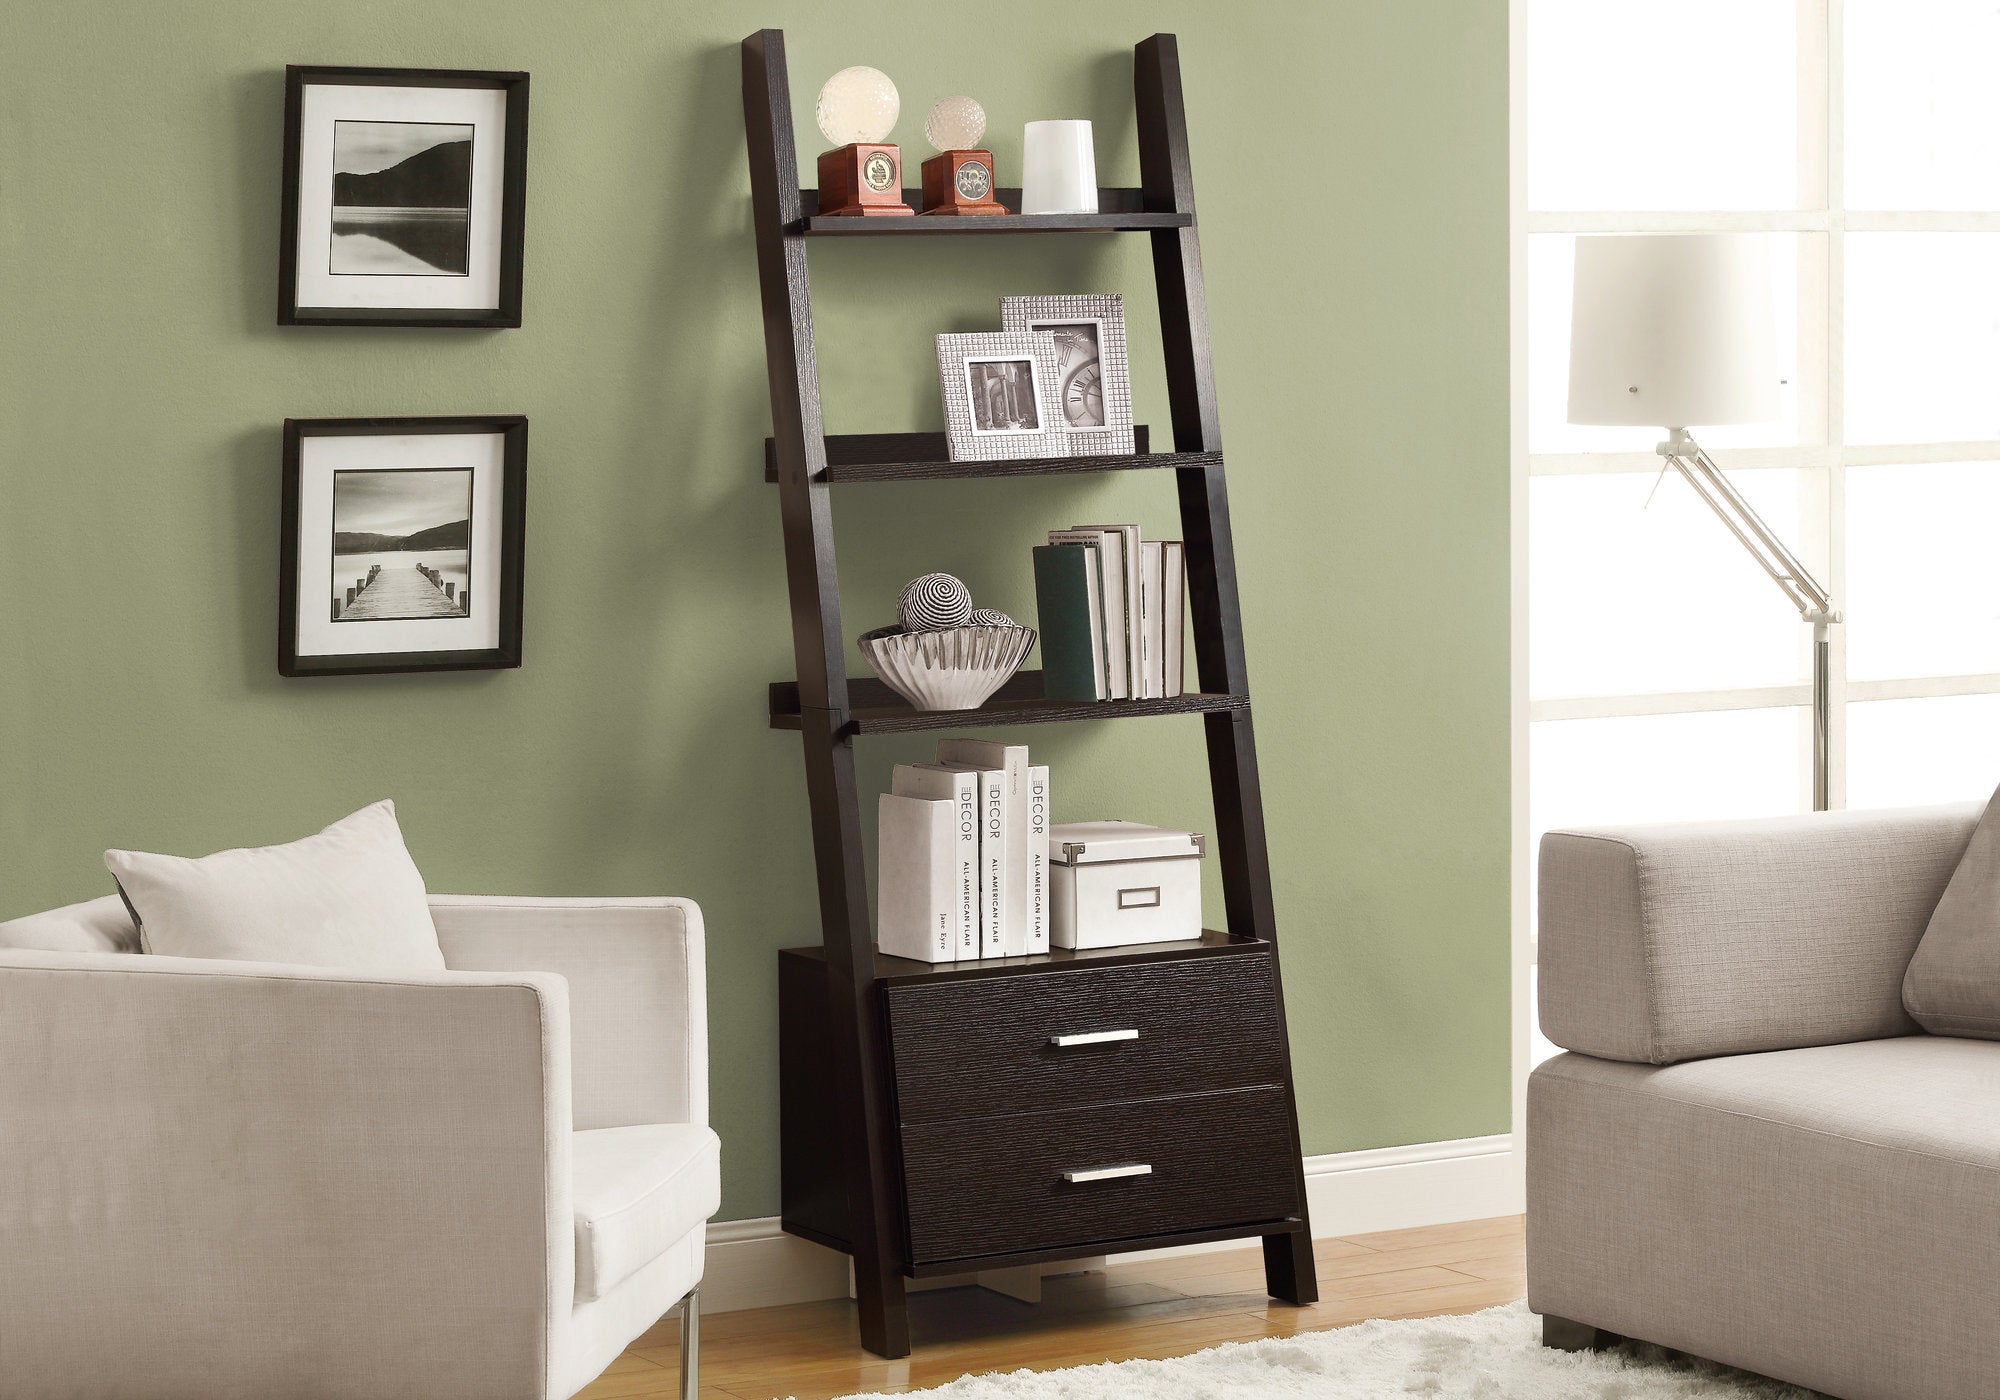 I 2542 - BOOKCASE - 69"H / CAPPUCCINO LADDER W/ 2 STORAGE DRAWERS By Monarch Specialties Inc